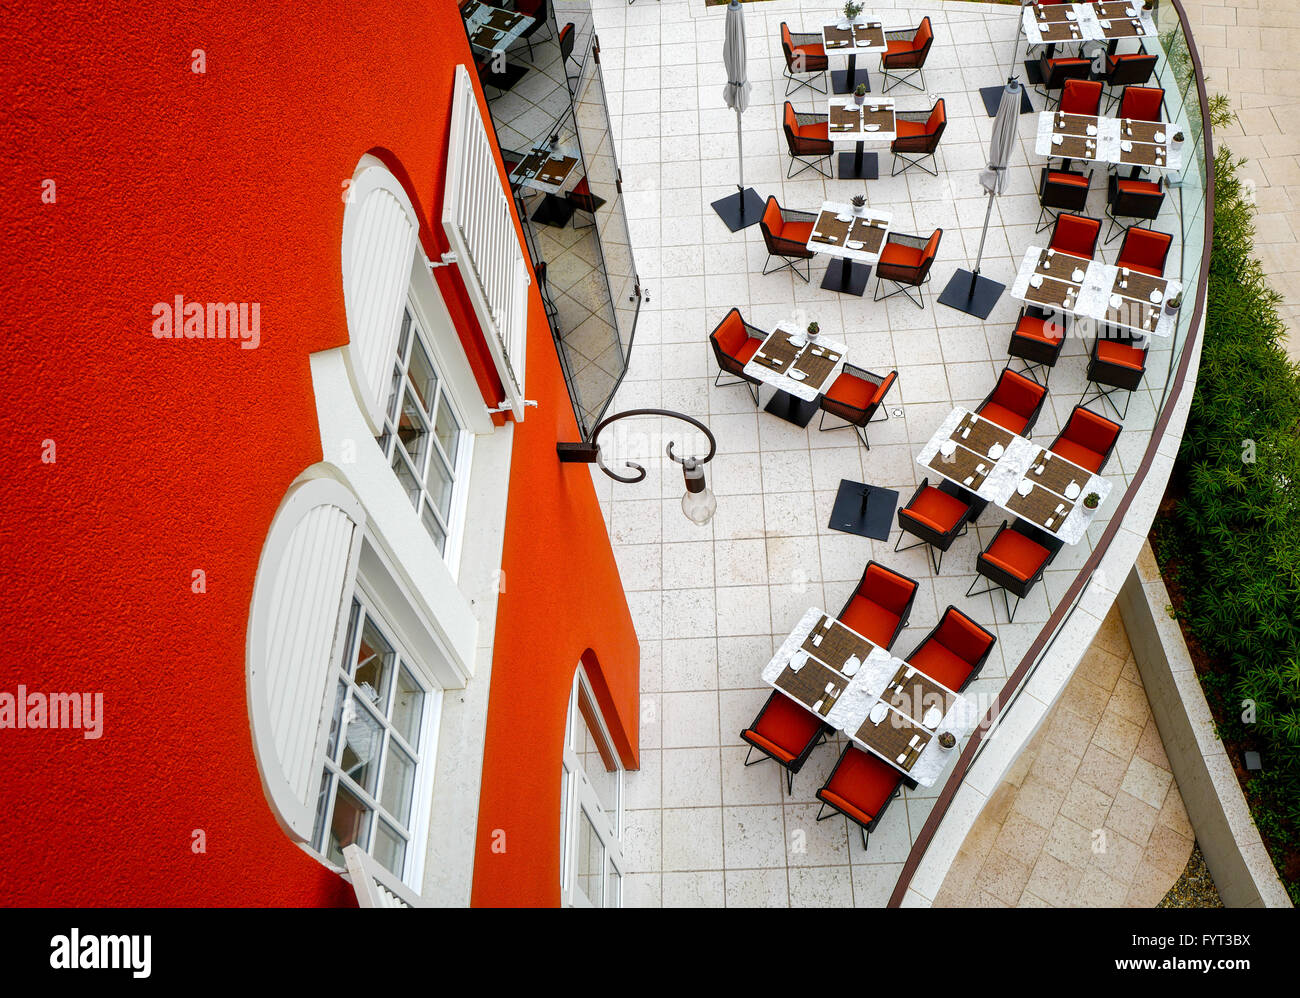 Arranged tables and chairs on restaurant terrace Stock Photo